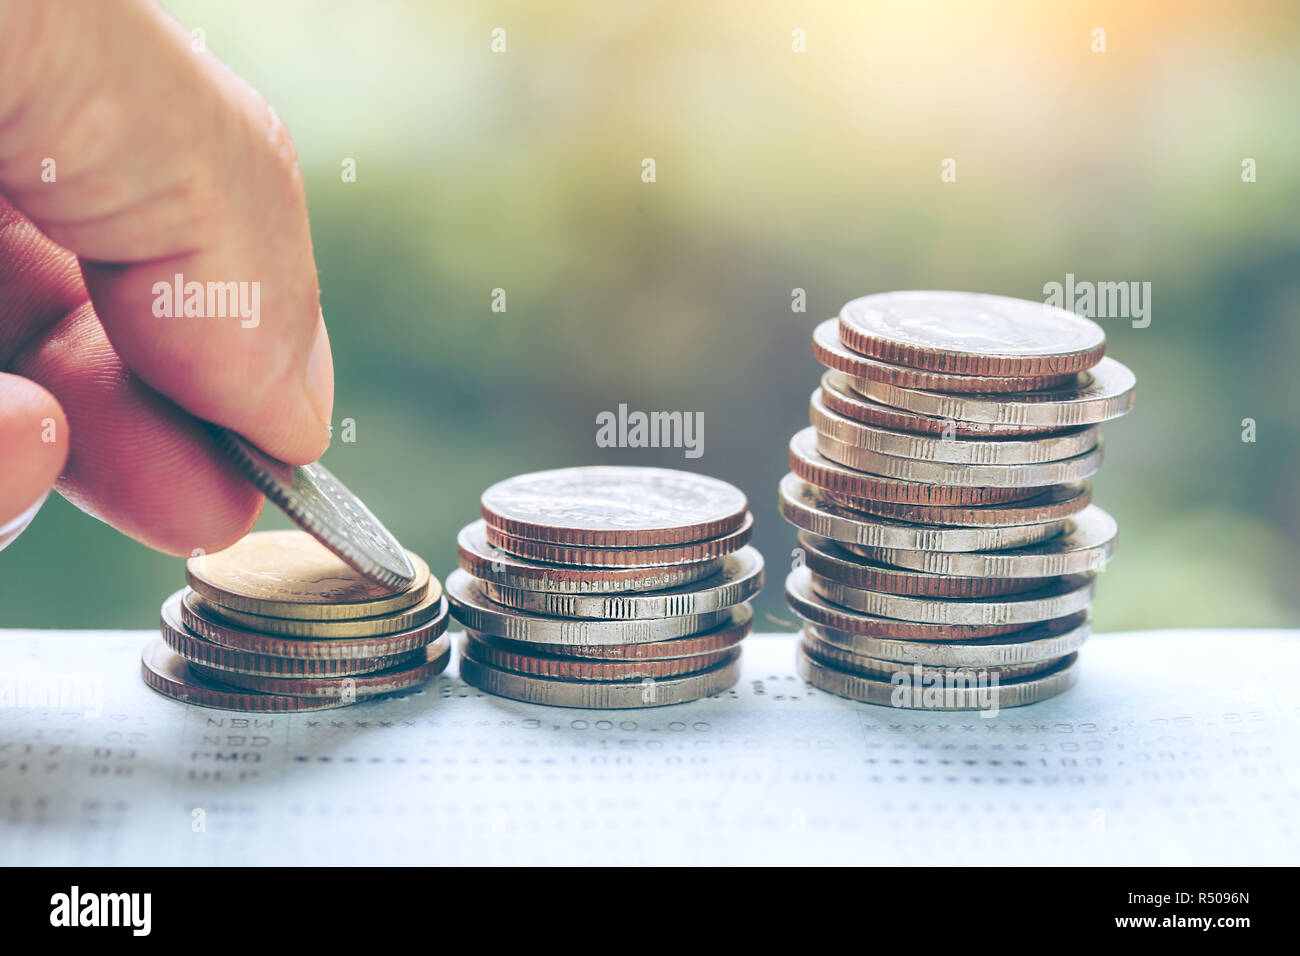 business and money saving concept - close up of man hand putting euro coins into columns, coins stack in front of bank account book Savings money of c Stock Photo